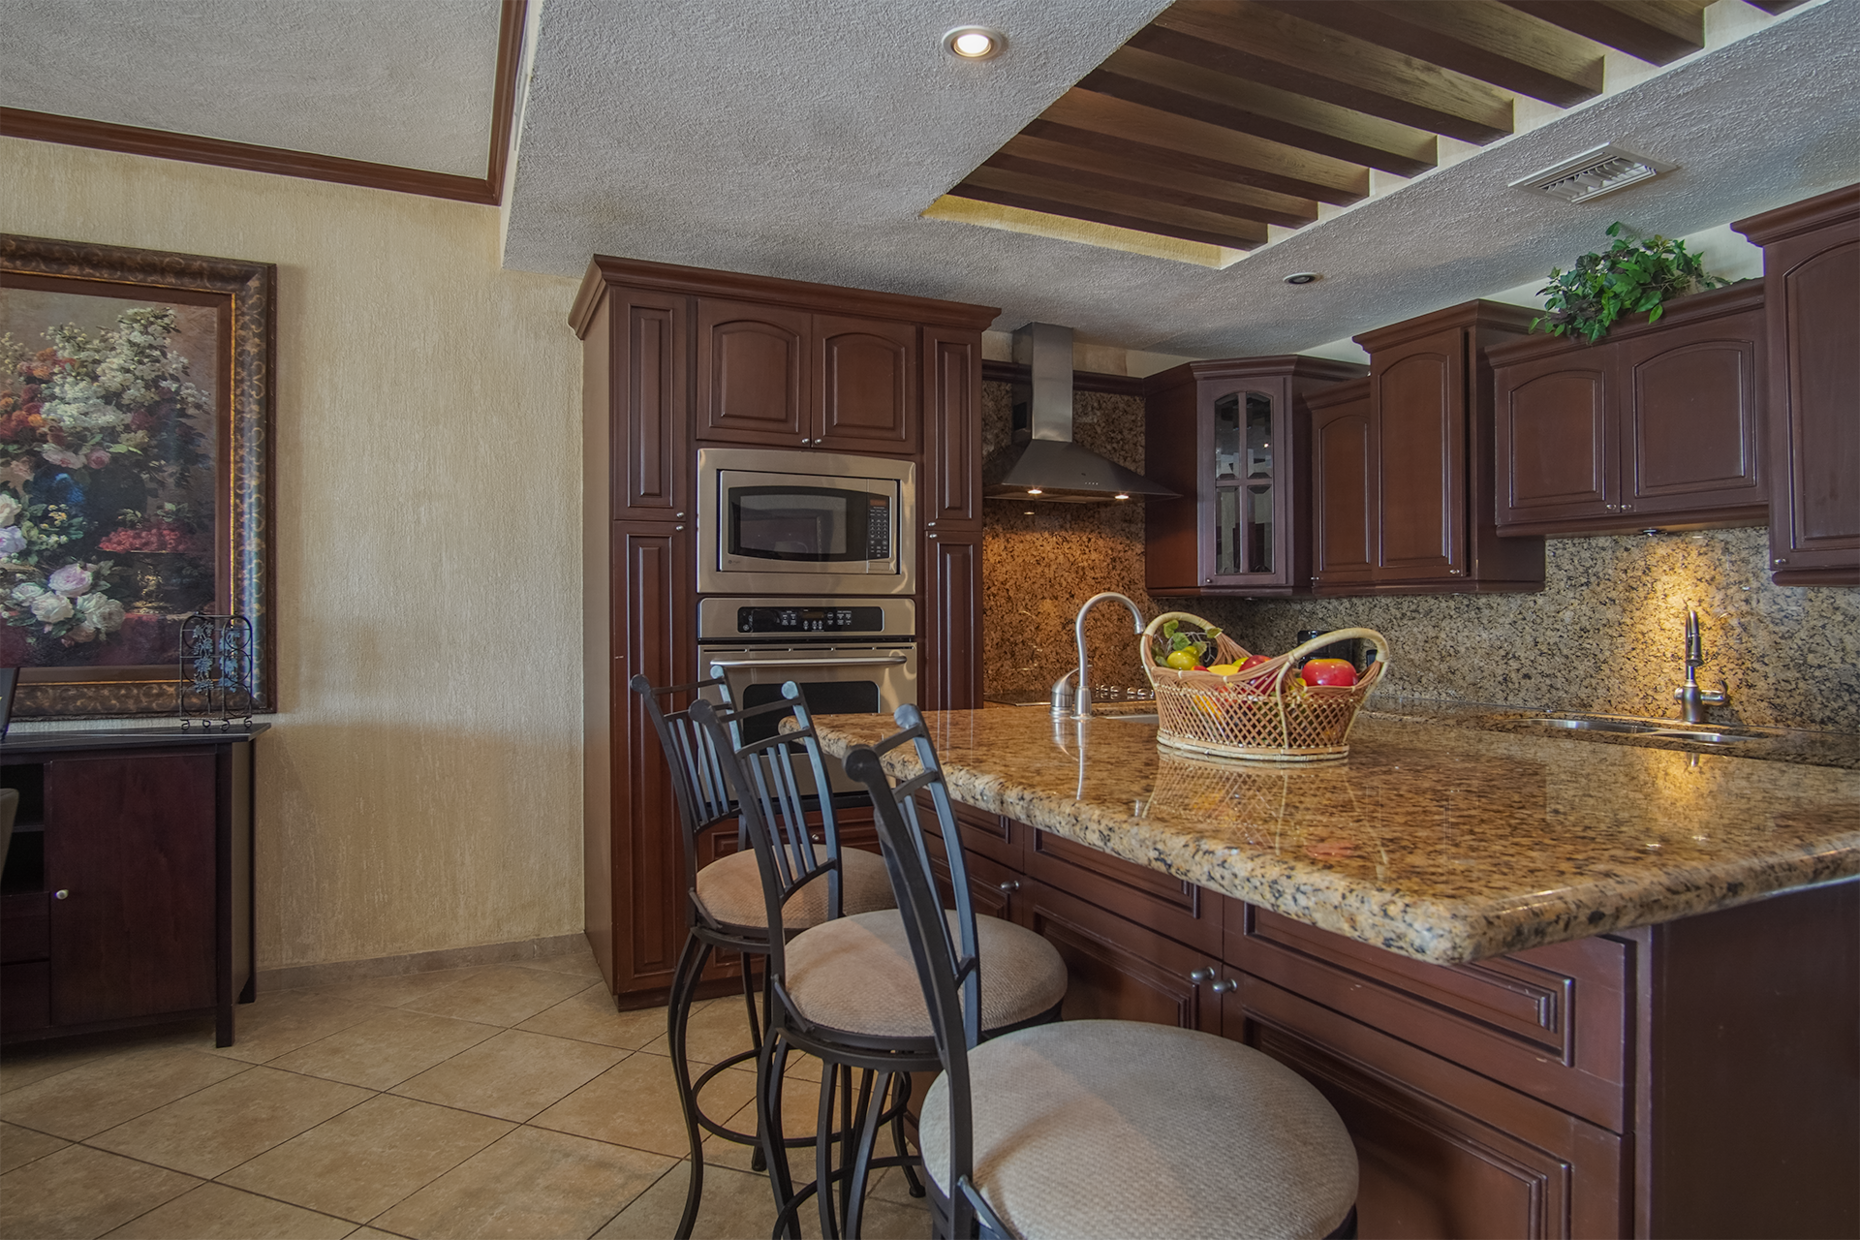 The kitchen counter and rich decor